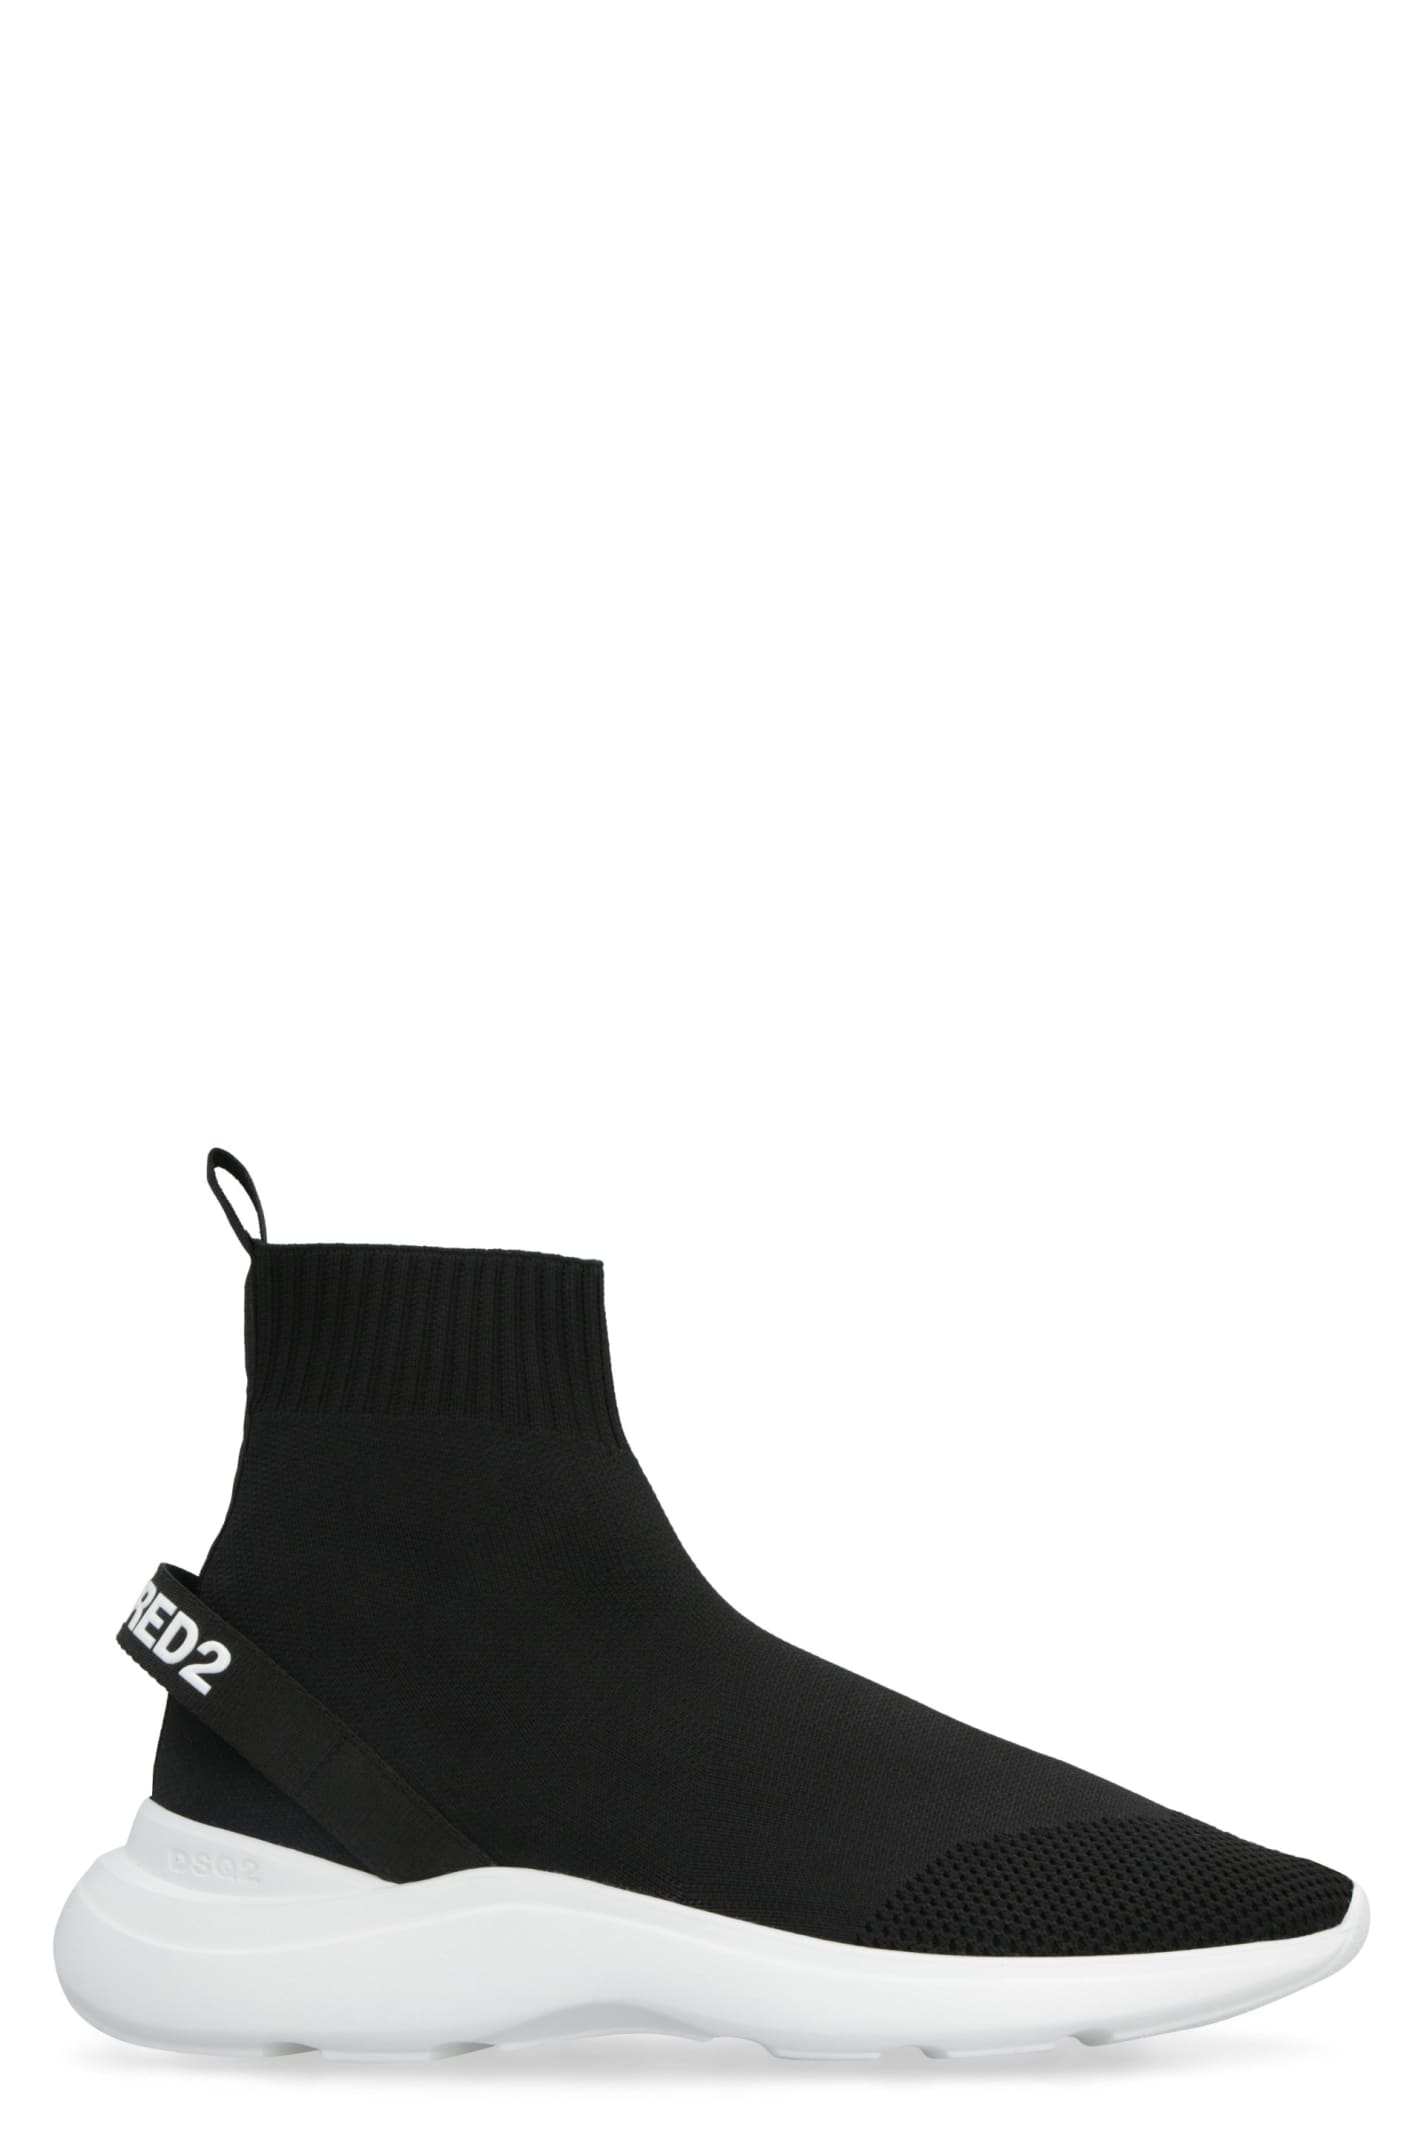 DSQUARED2 FLY KNITTED SOCK-SNEAKERS